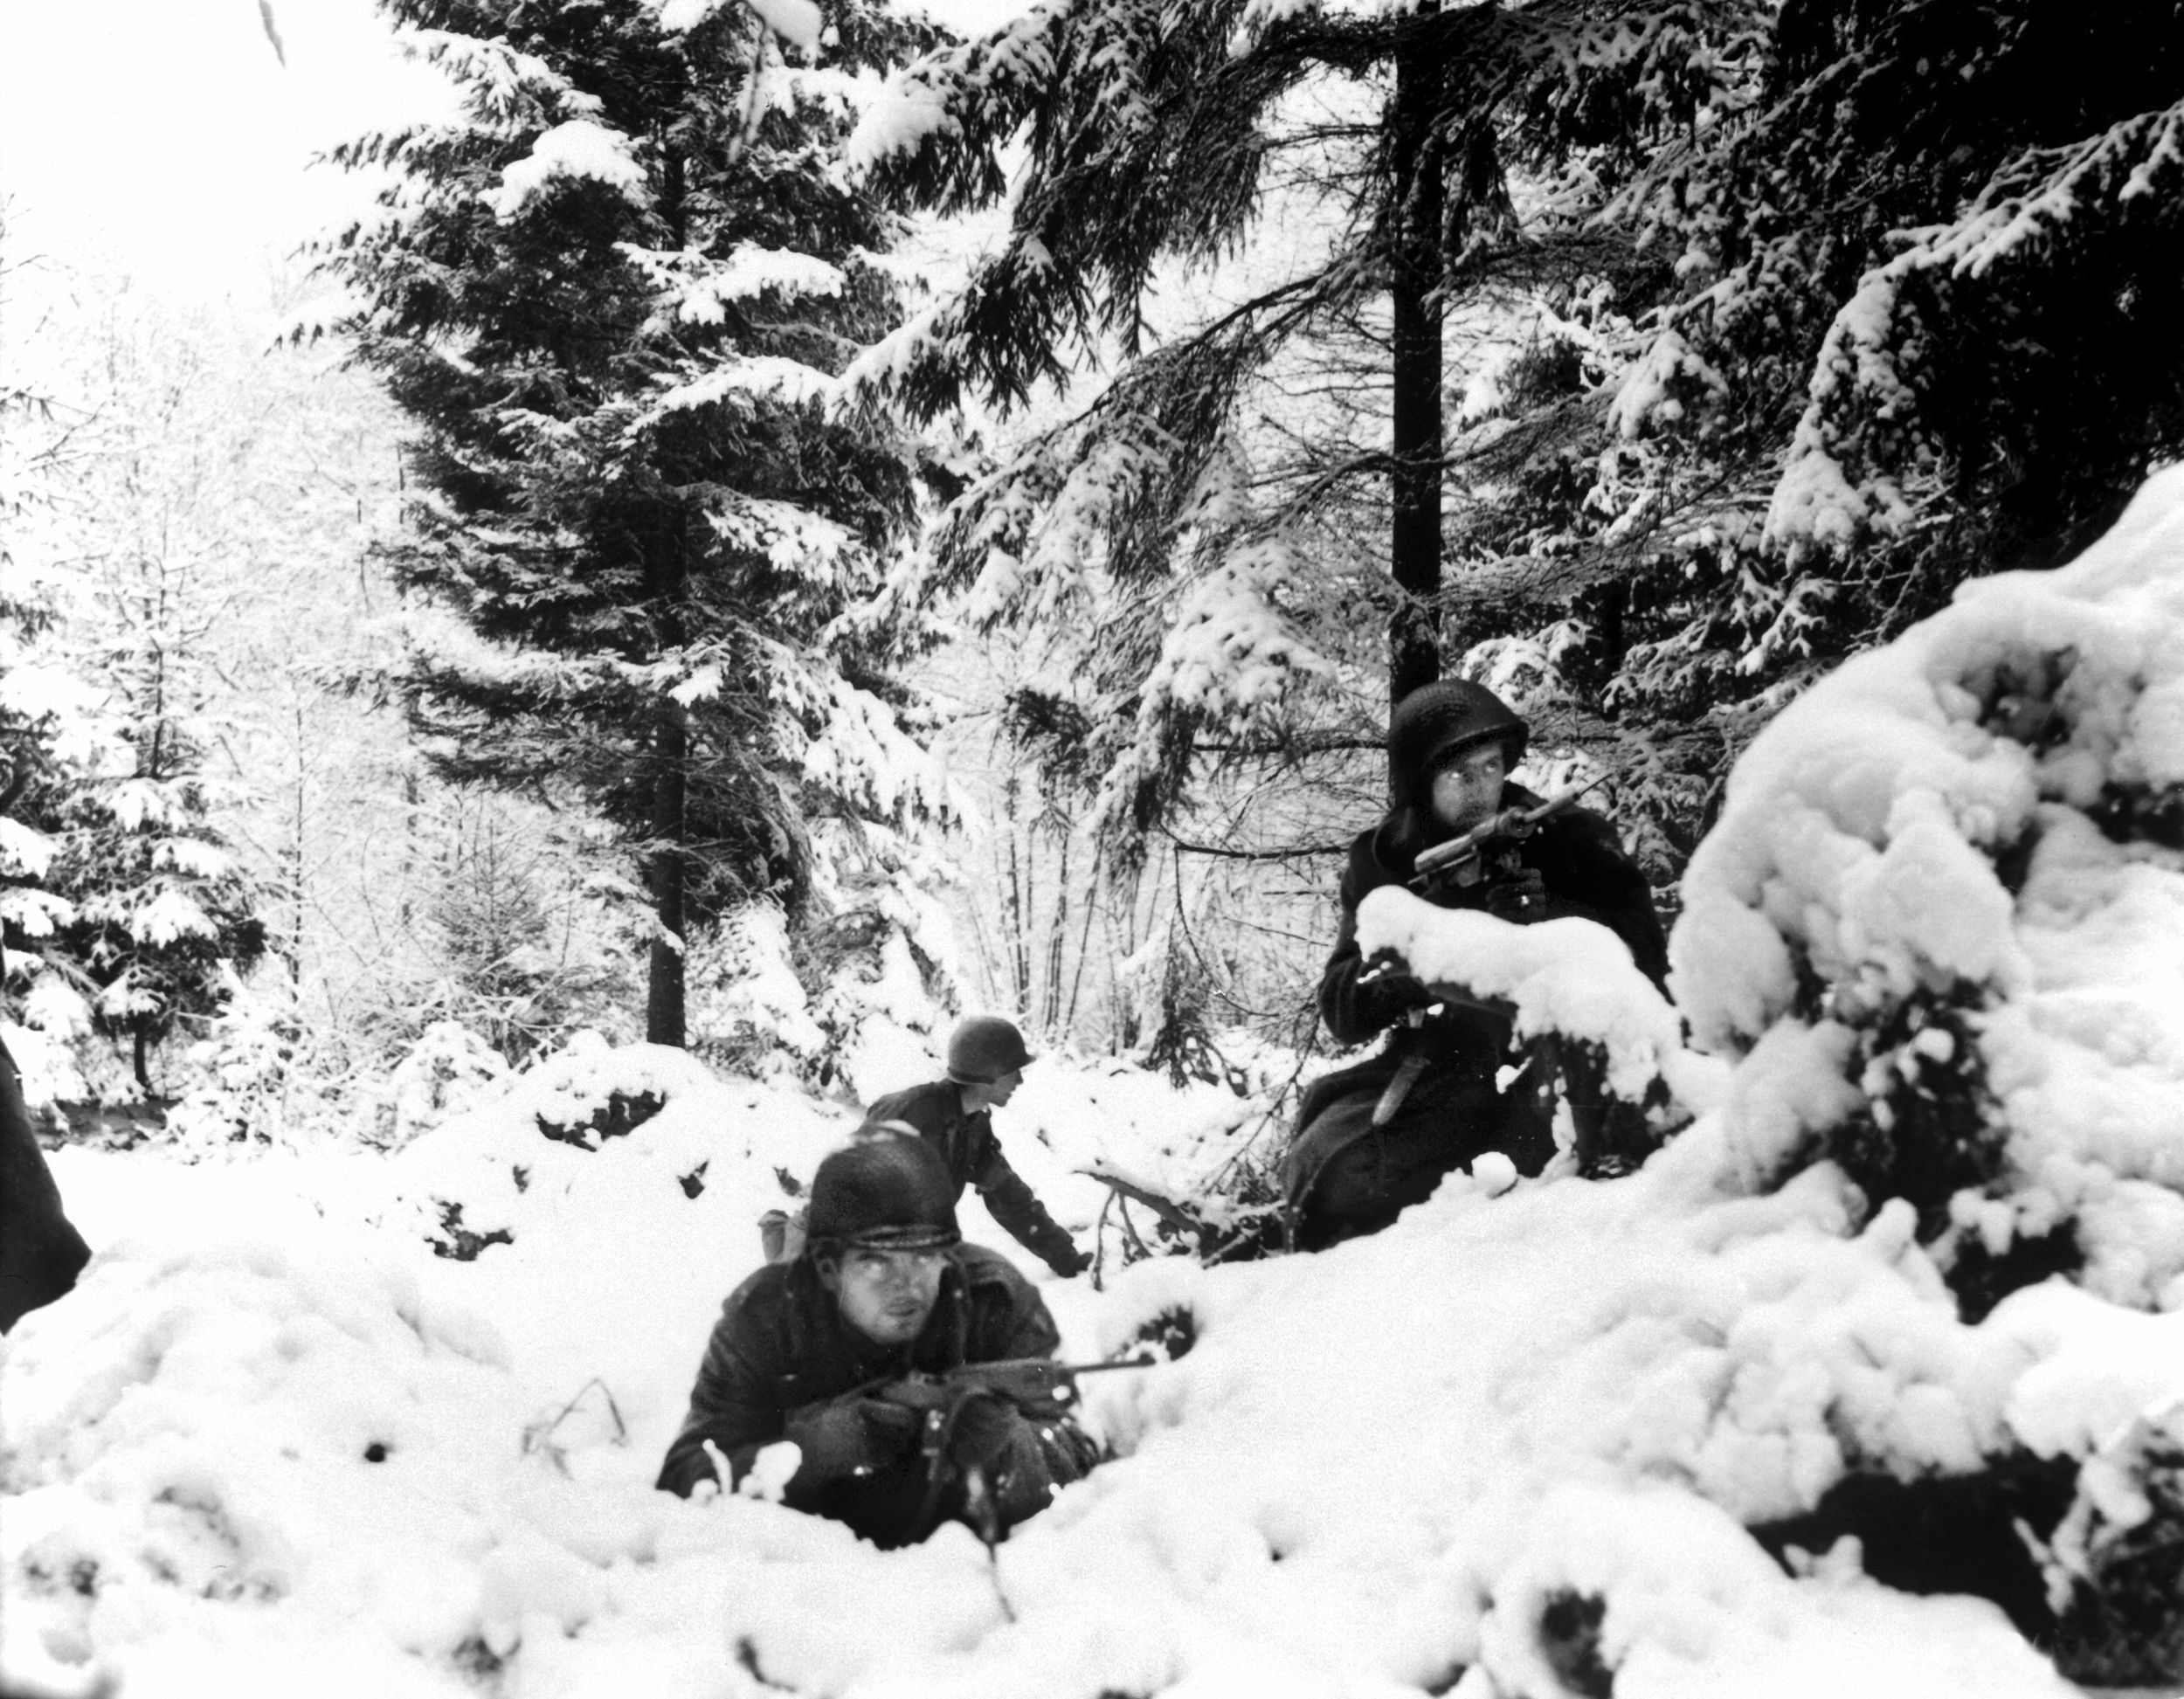 American soldiers advance warily through heavy snow during the Battle of the Bulge. The surprise German offensive caught the Americans off guard, and many service personnel were pressed into action against the enemy. Clerks, cooks, and drivers were among those who took up weapons such as the M-1 carbine in the hands of the soldier in the foreground. In fact, the carbine may indicate that this soldier has been pulled from a service post for combat duty.